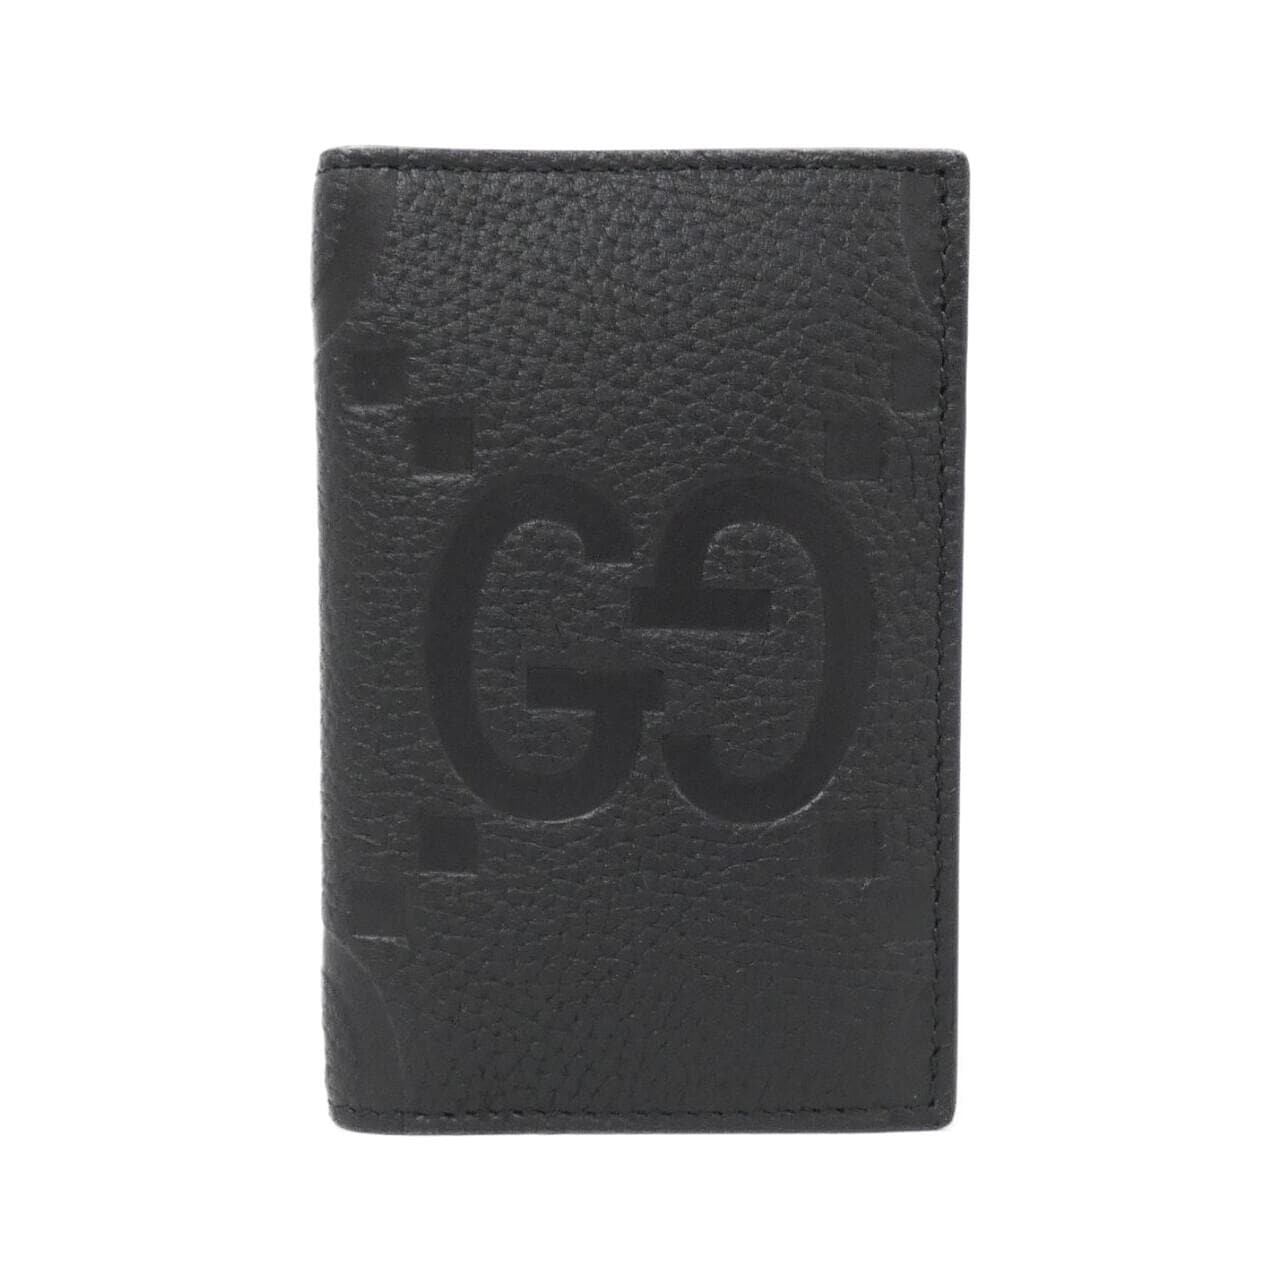 [BRAND NEW] Gucci 739478 AABY0 Card Case